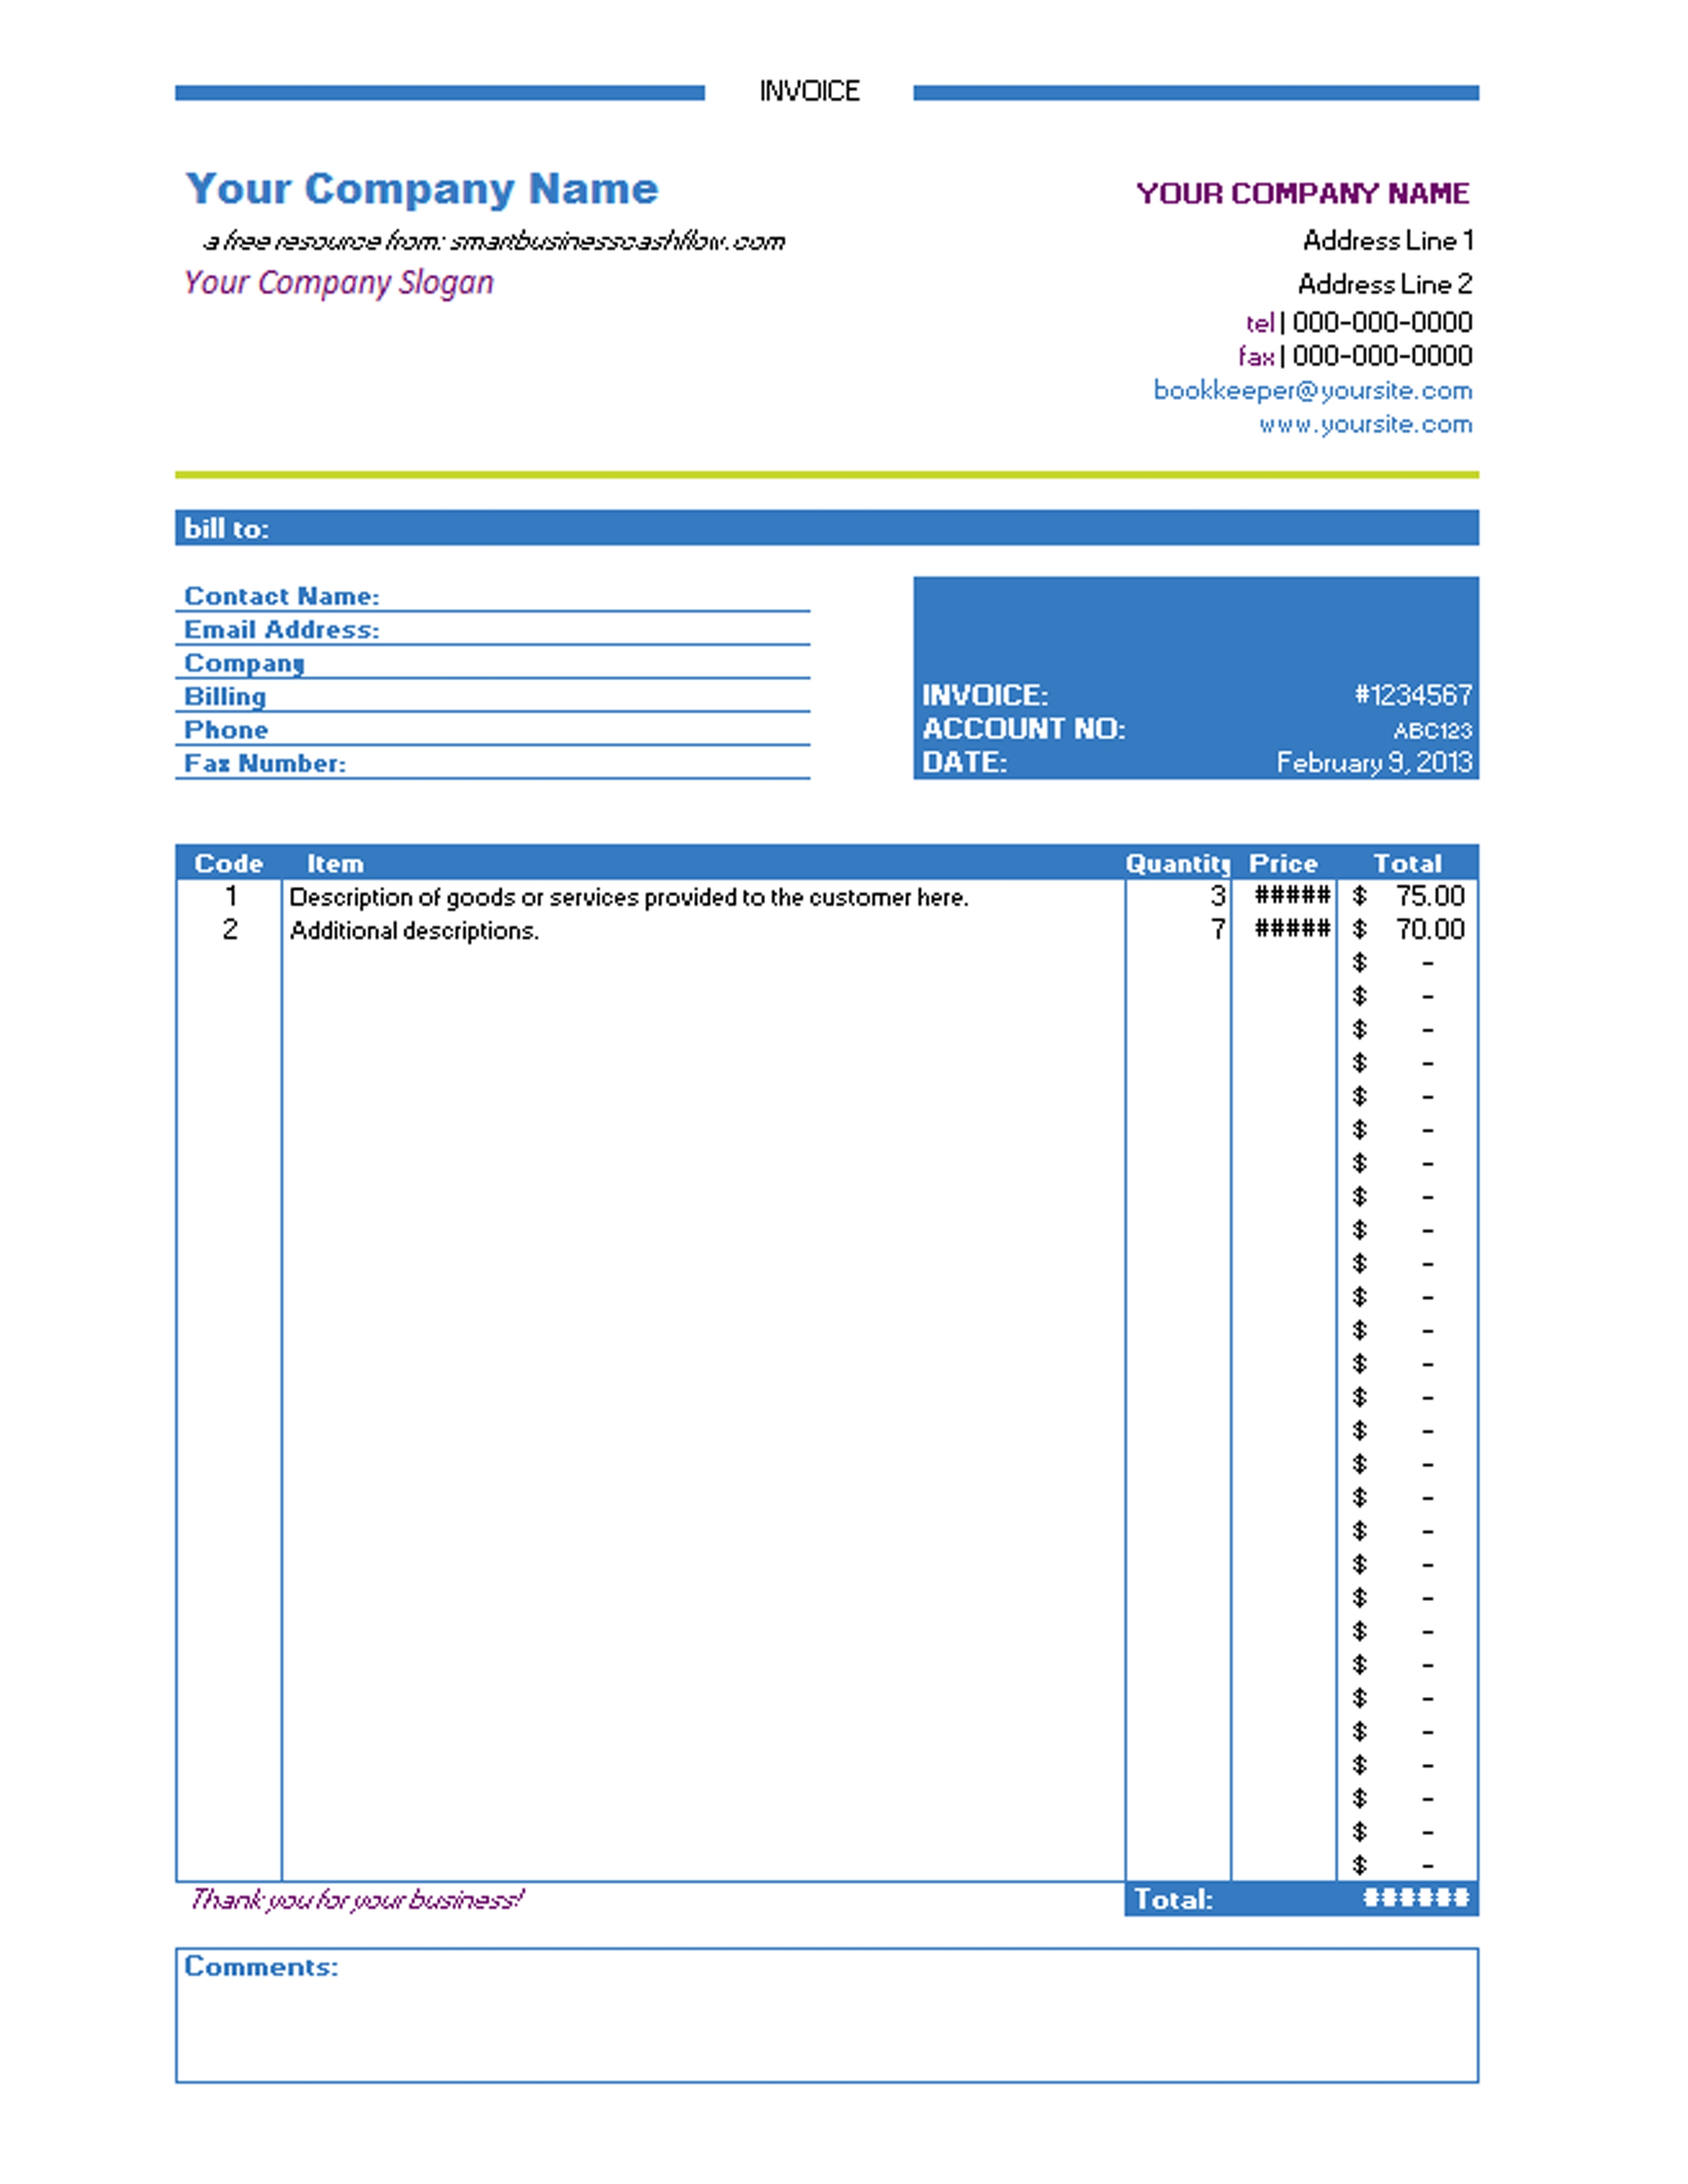 invoice template excel invoice sample template sales invoice invoice on excel